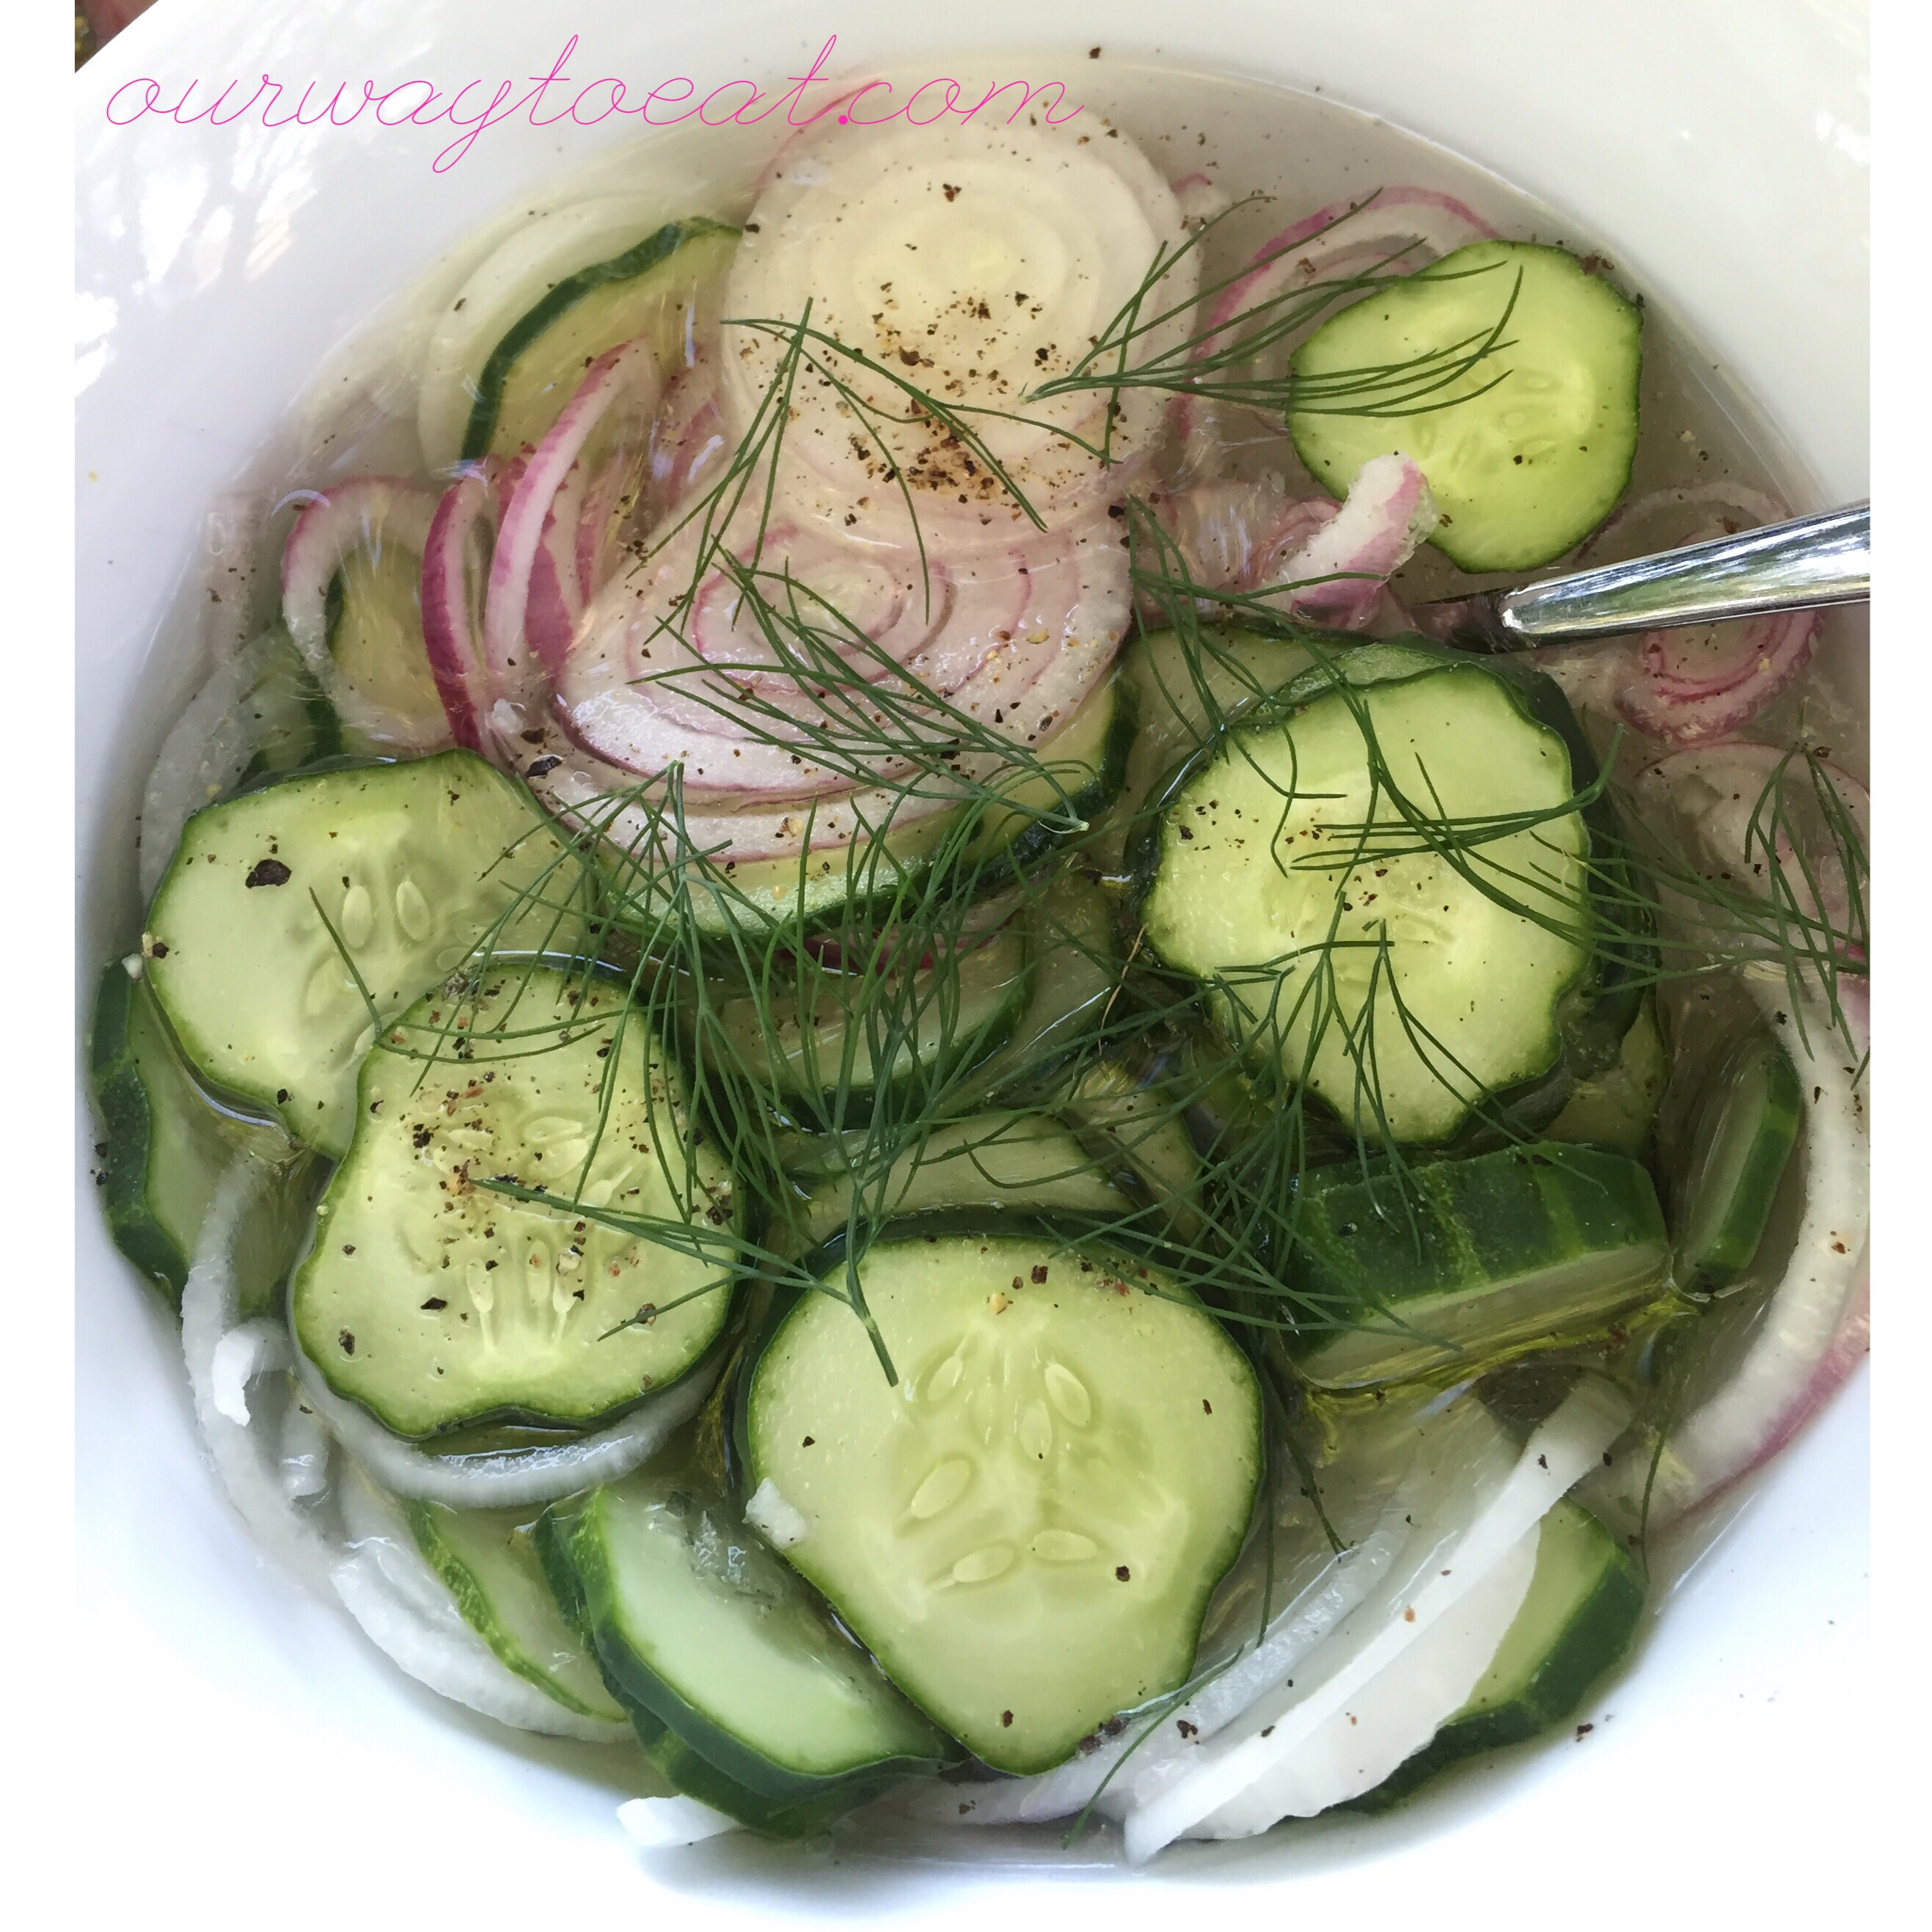 ourwaytoeat Cukes and opinions in vinegar